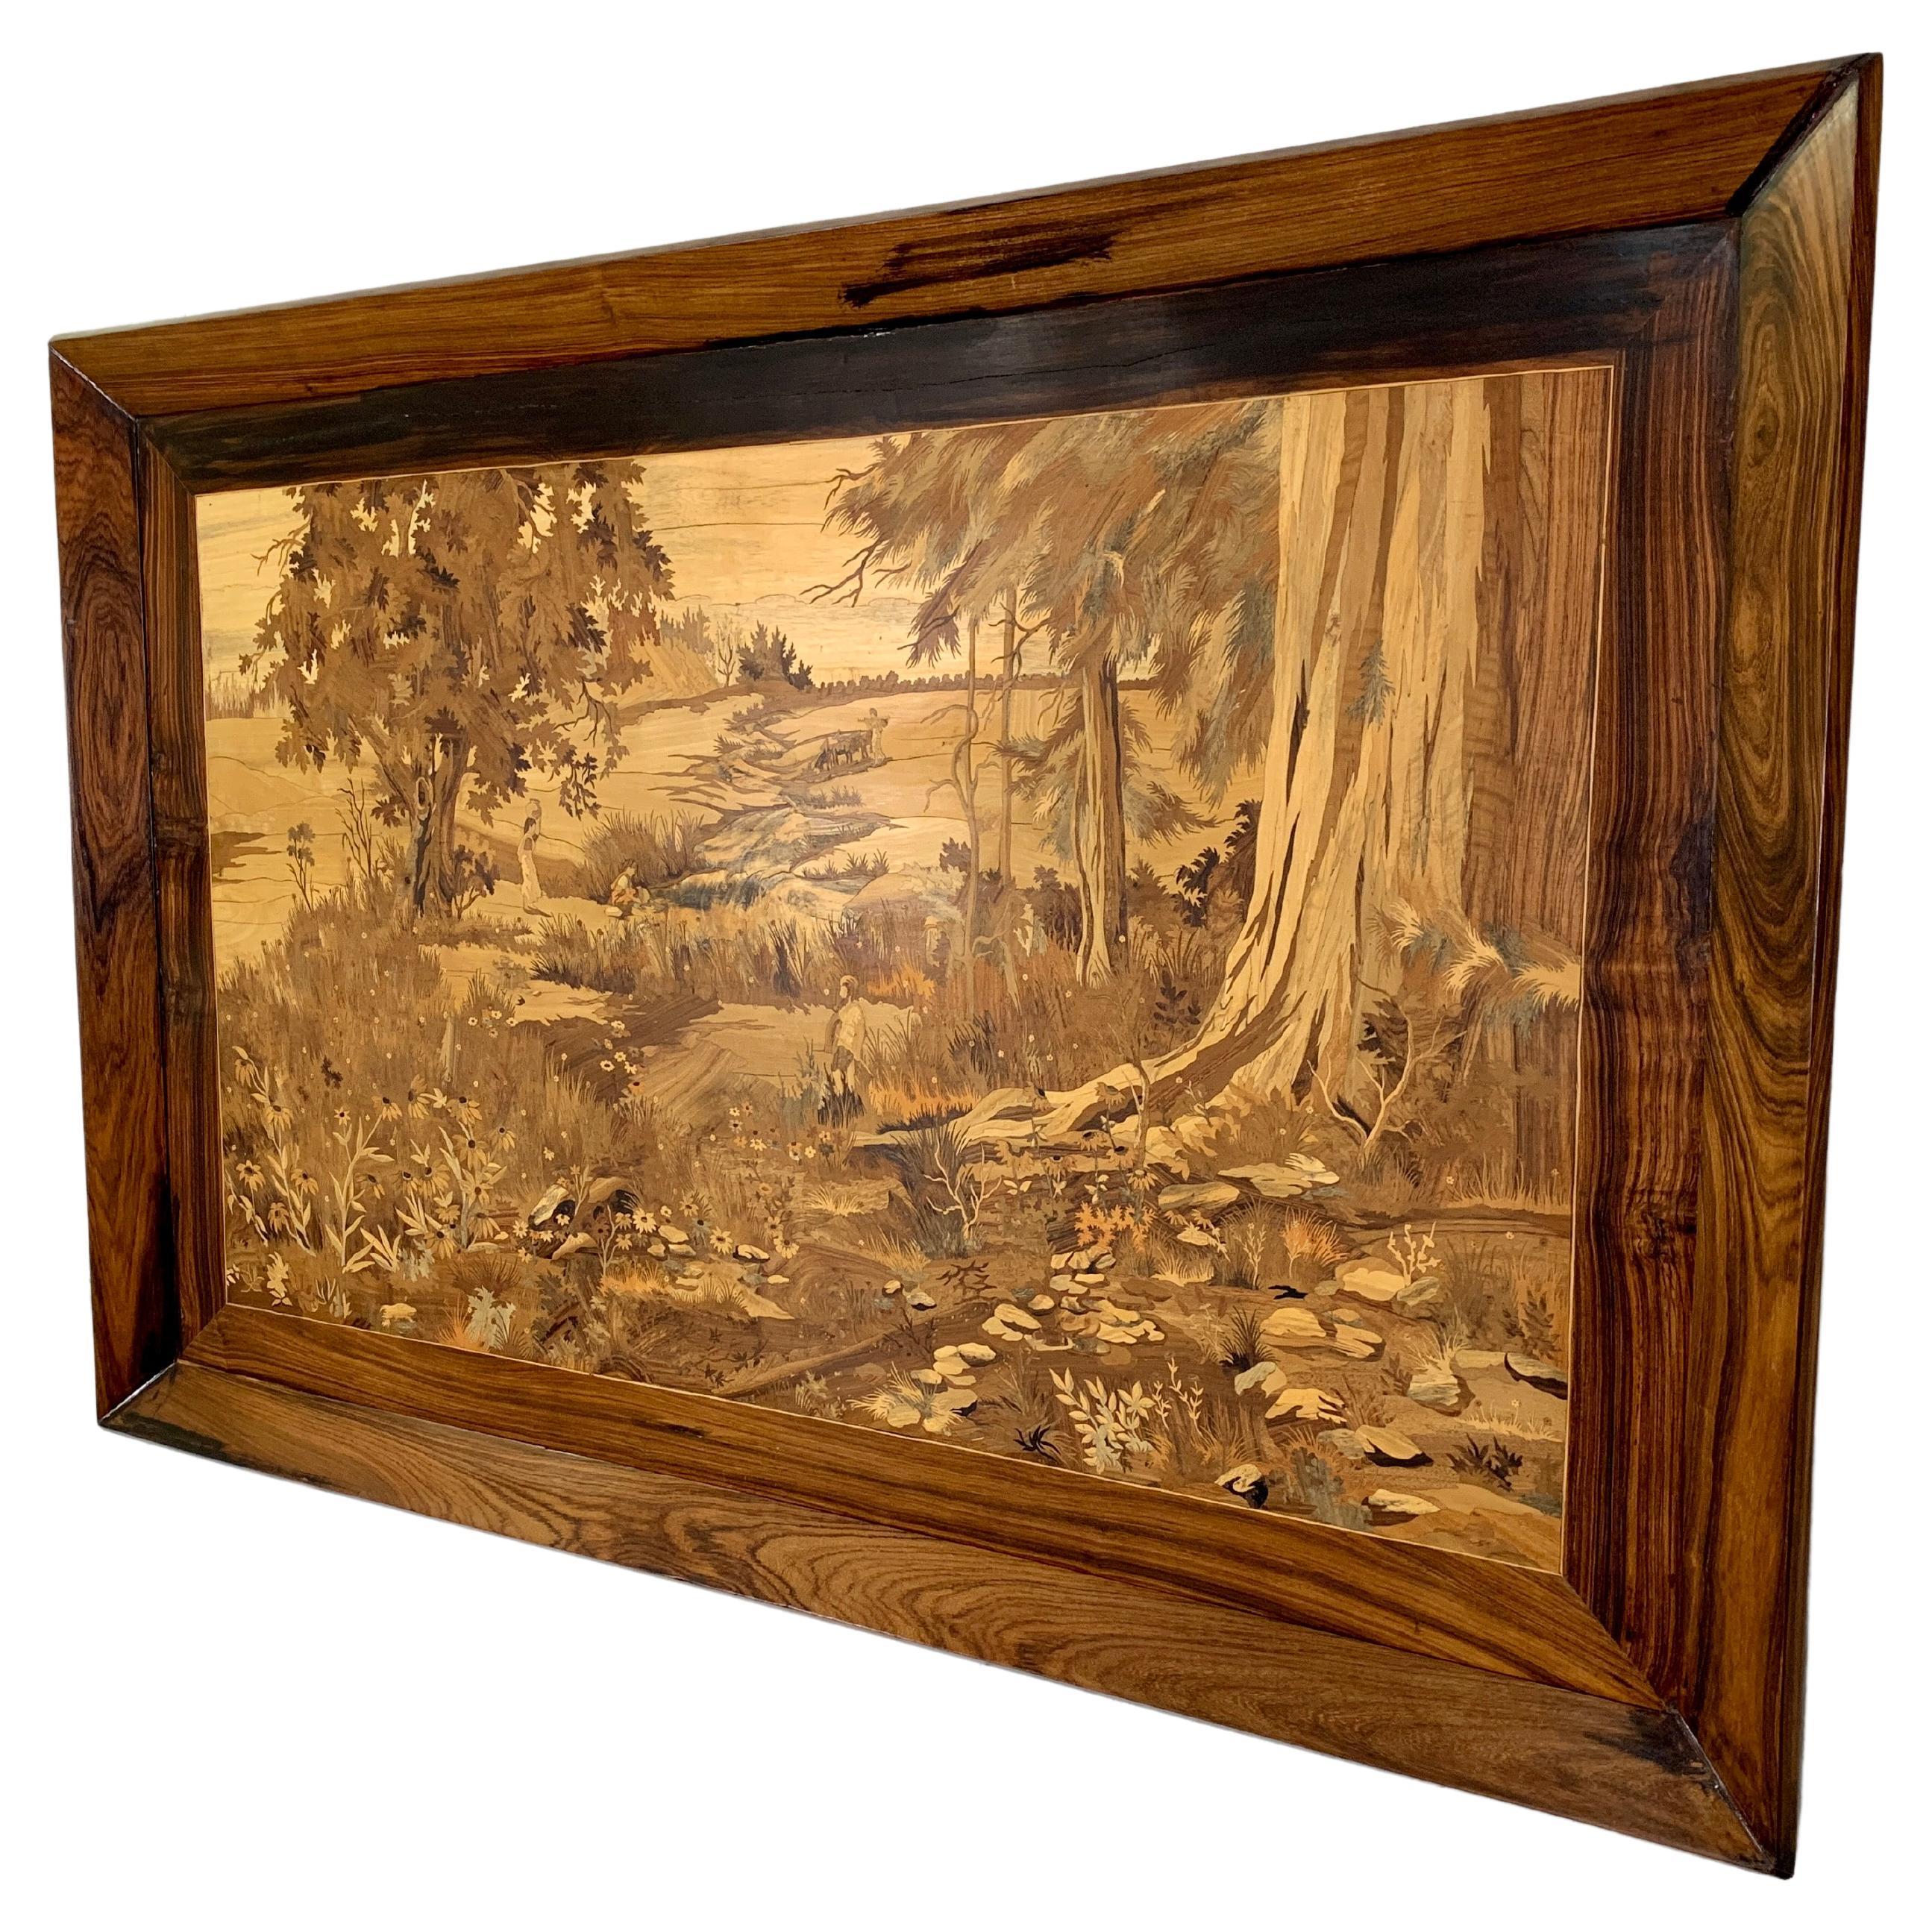 Antique forested design of marquetry with people foraging in an ancient forest. A variety of woods were used to give this depiction a lot of depth.